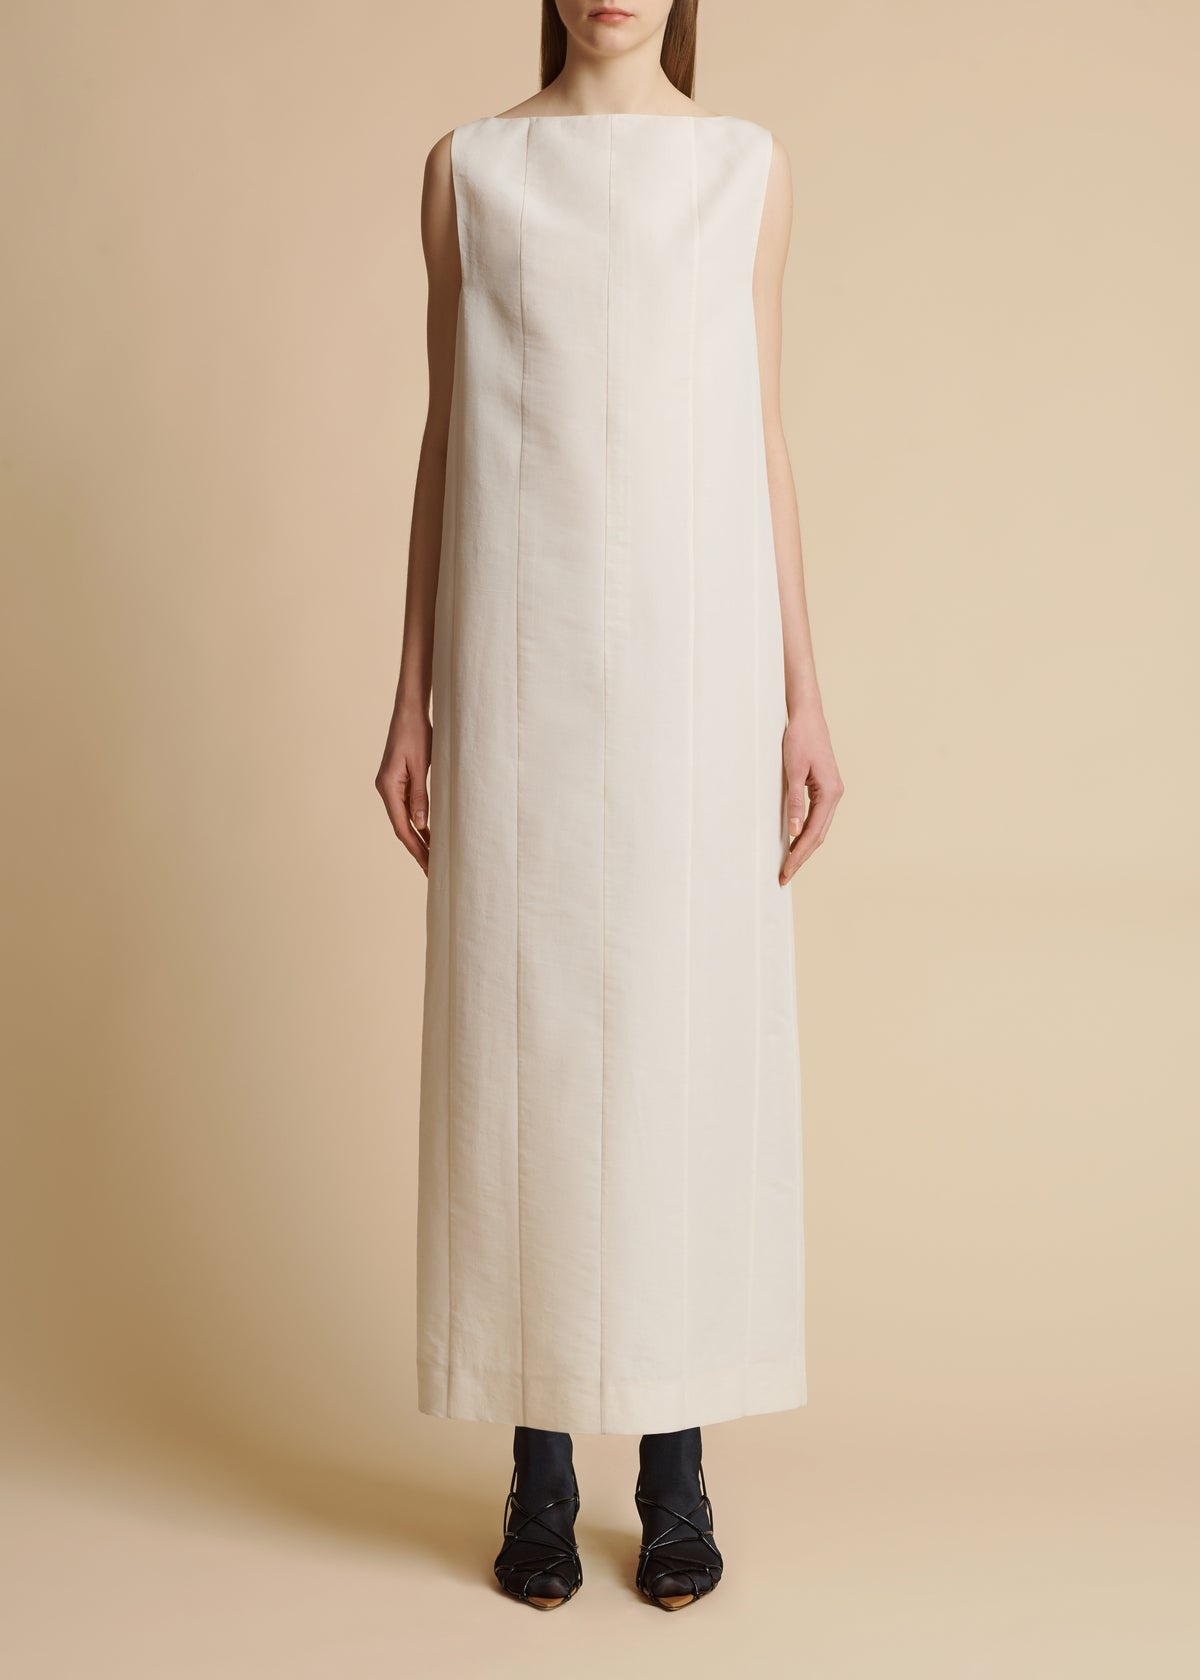 The Martay Dress in Natural - 2